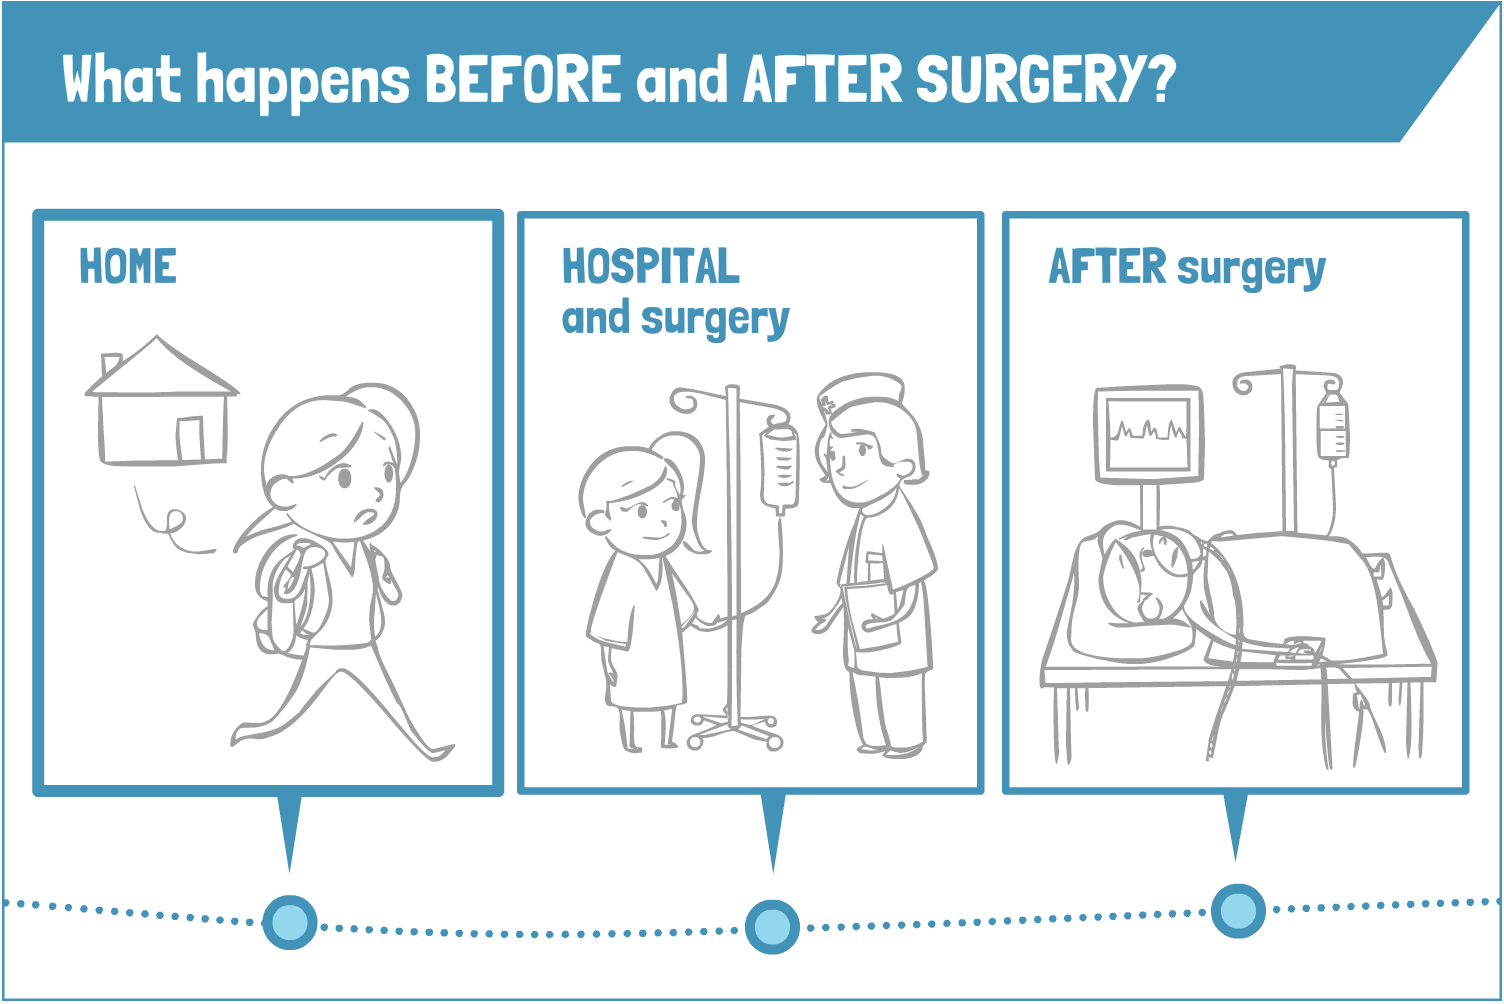 What happens before and after surgery module